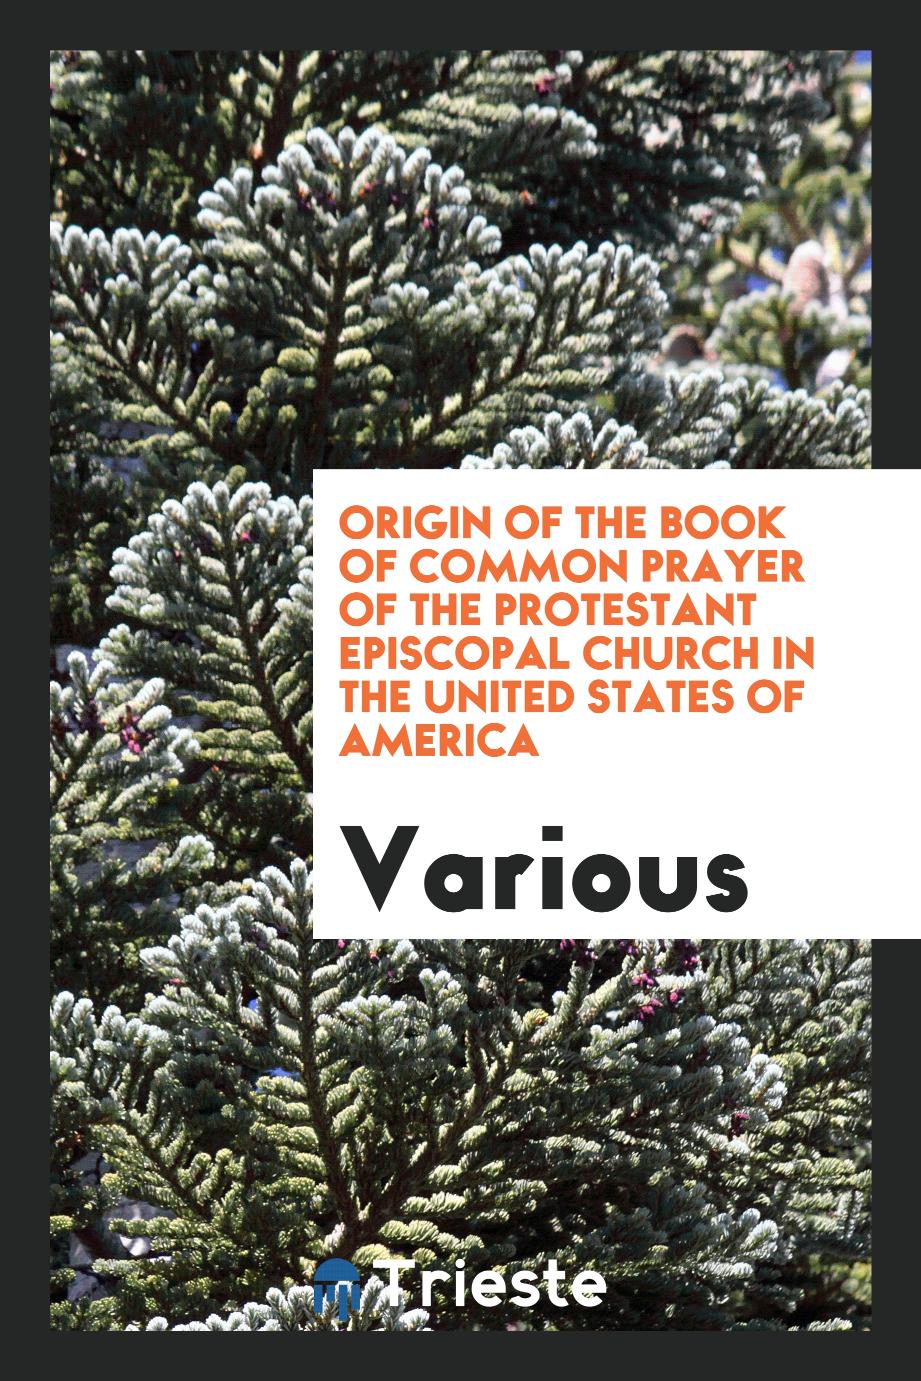 Origin of the Book of Common Prayer of the Protestant Episcopal Church in the United States of America